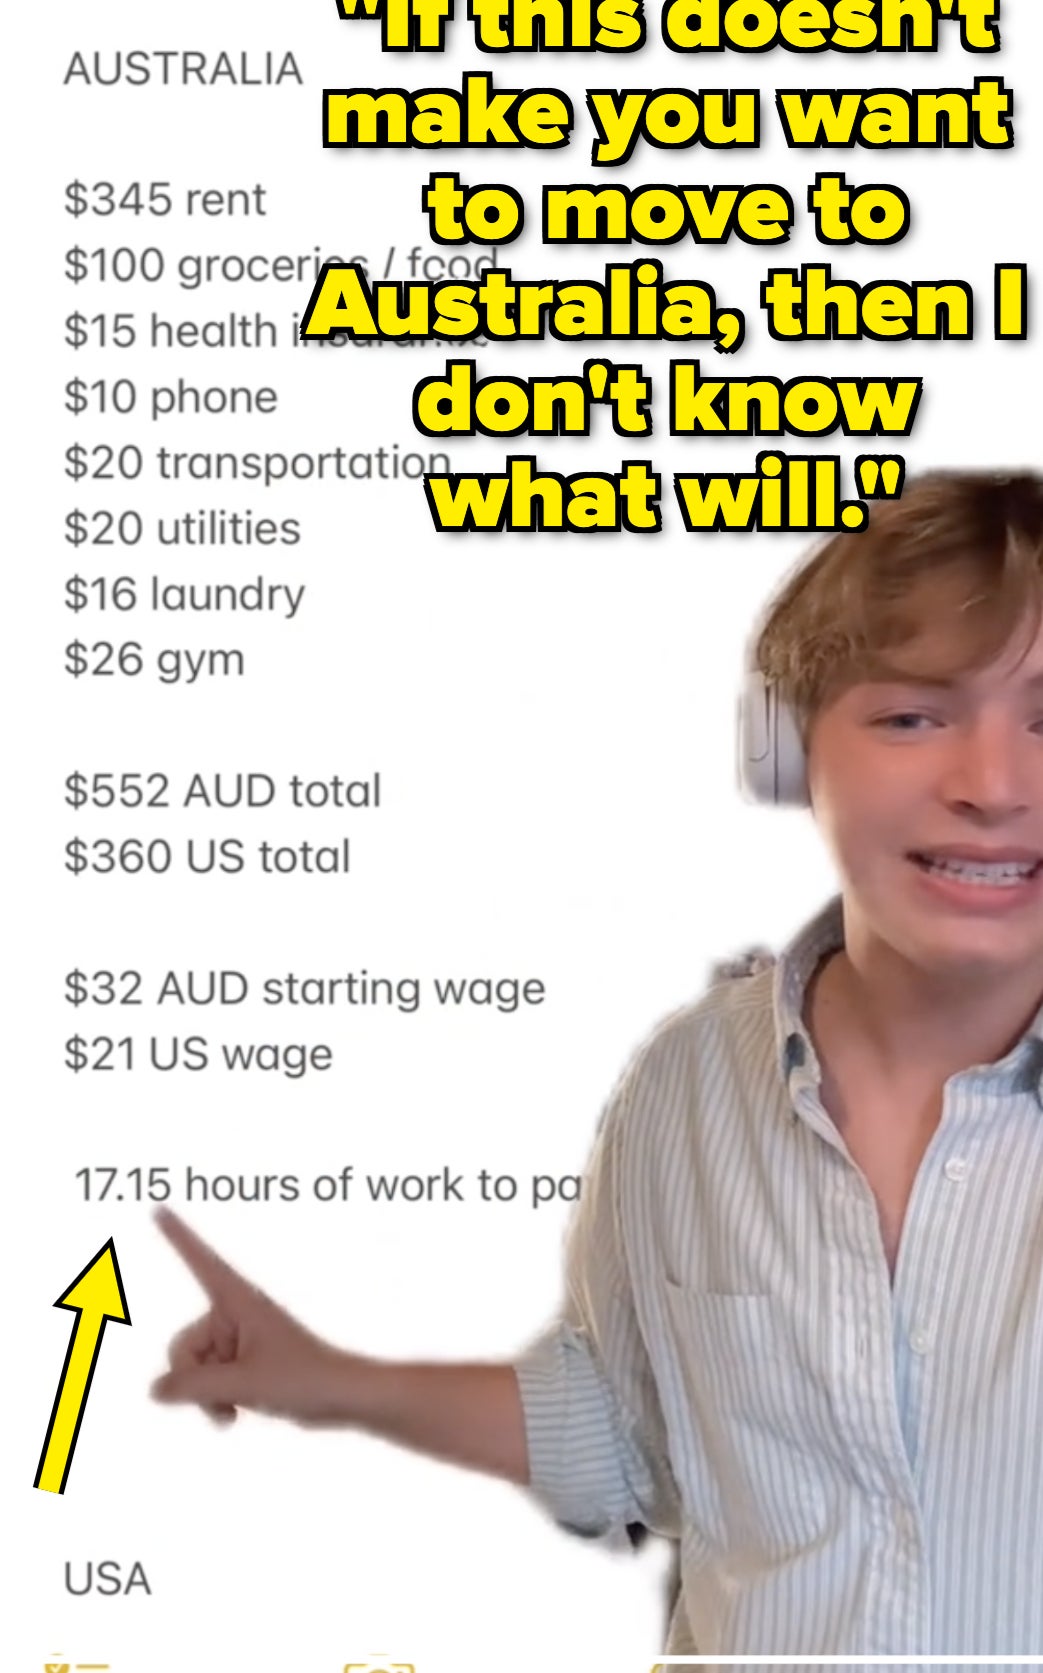 Person presenting a comparison chart of living costs between Australia and USA